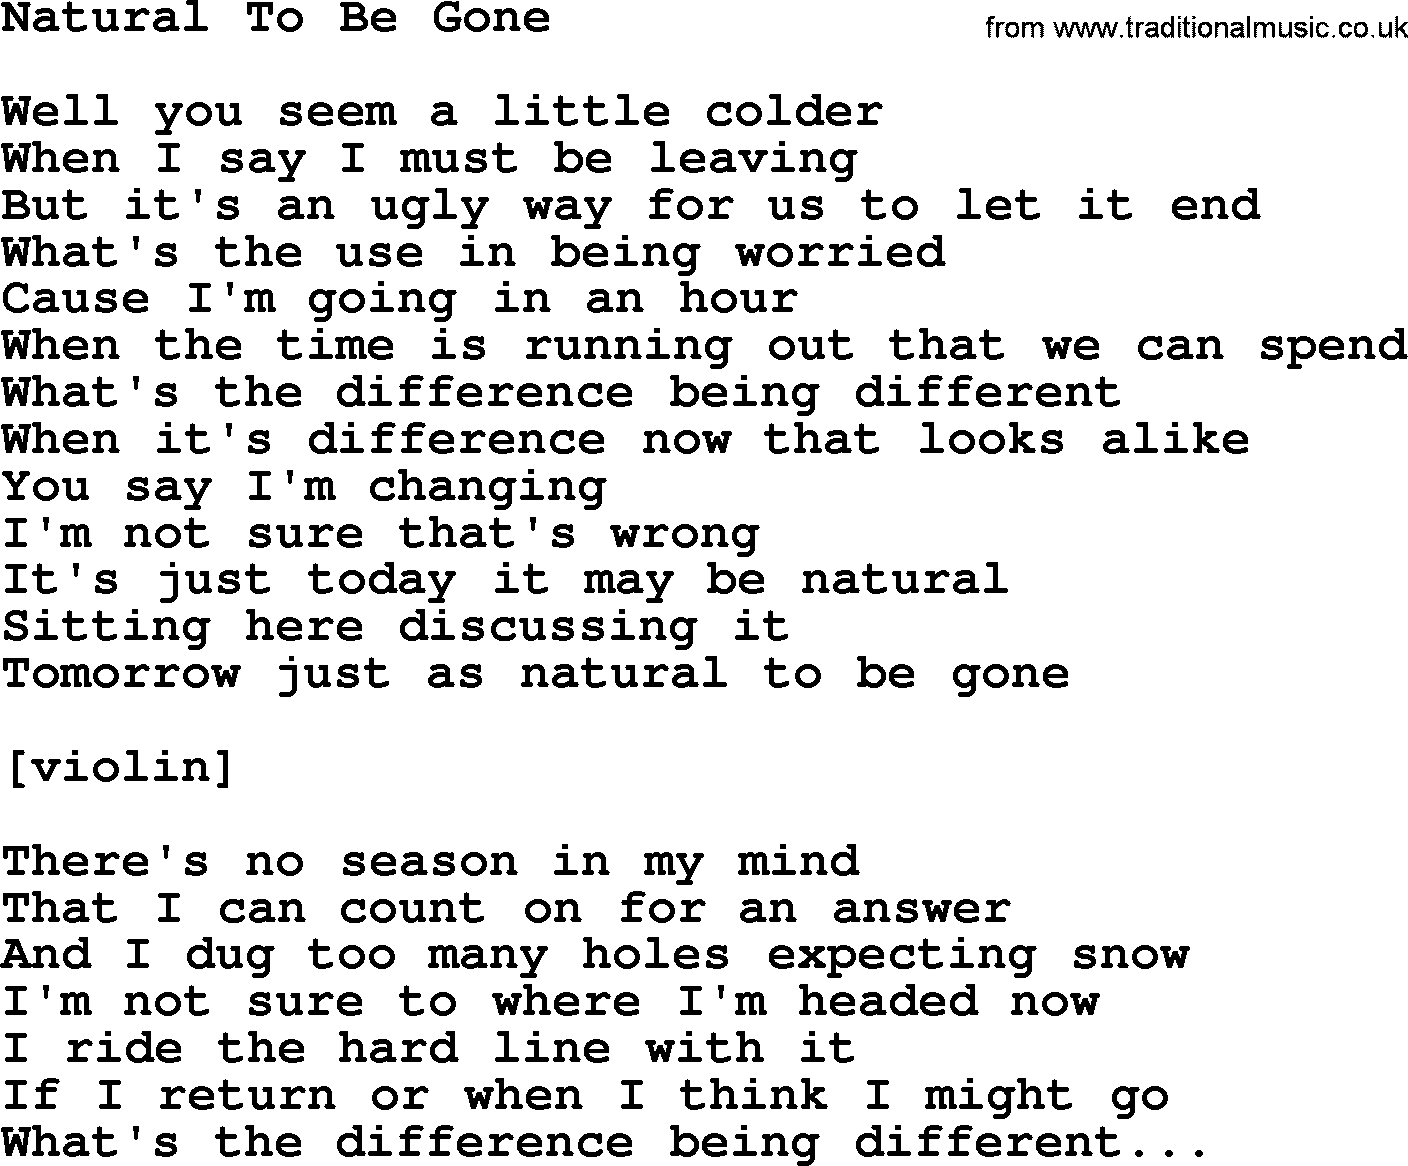 Willie Nelson song: Natural To Be Gone lyrics